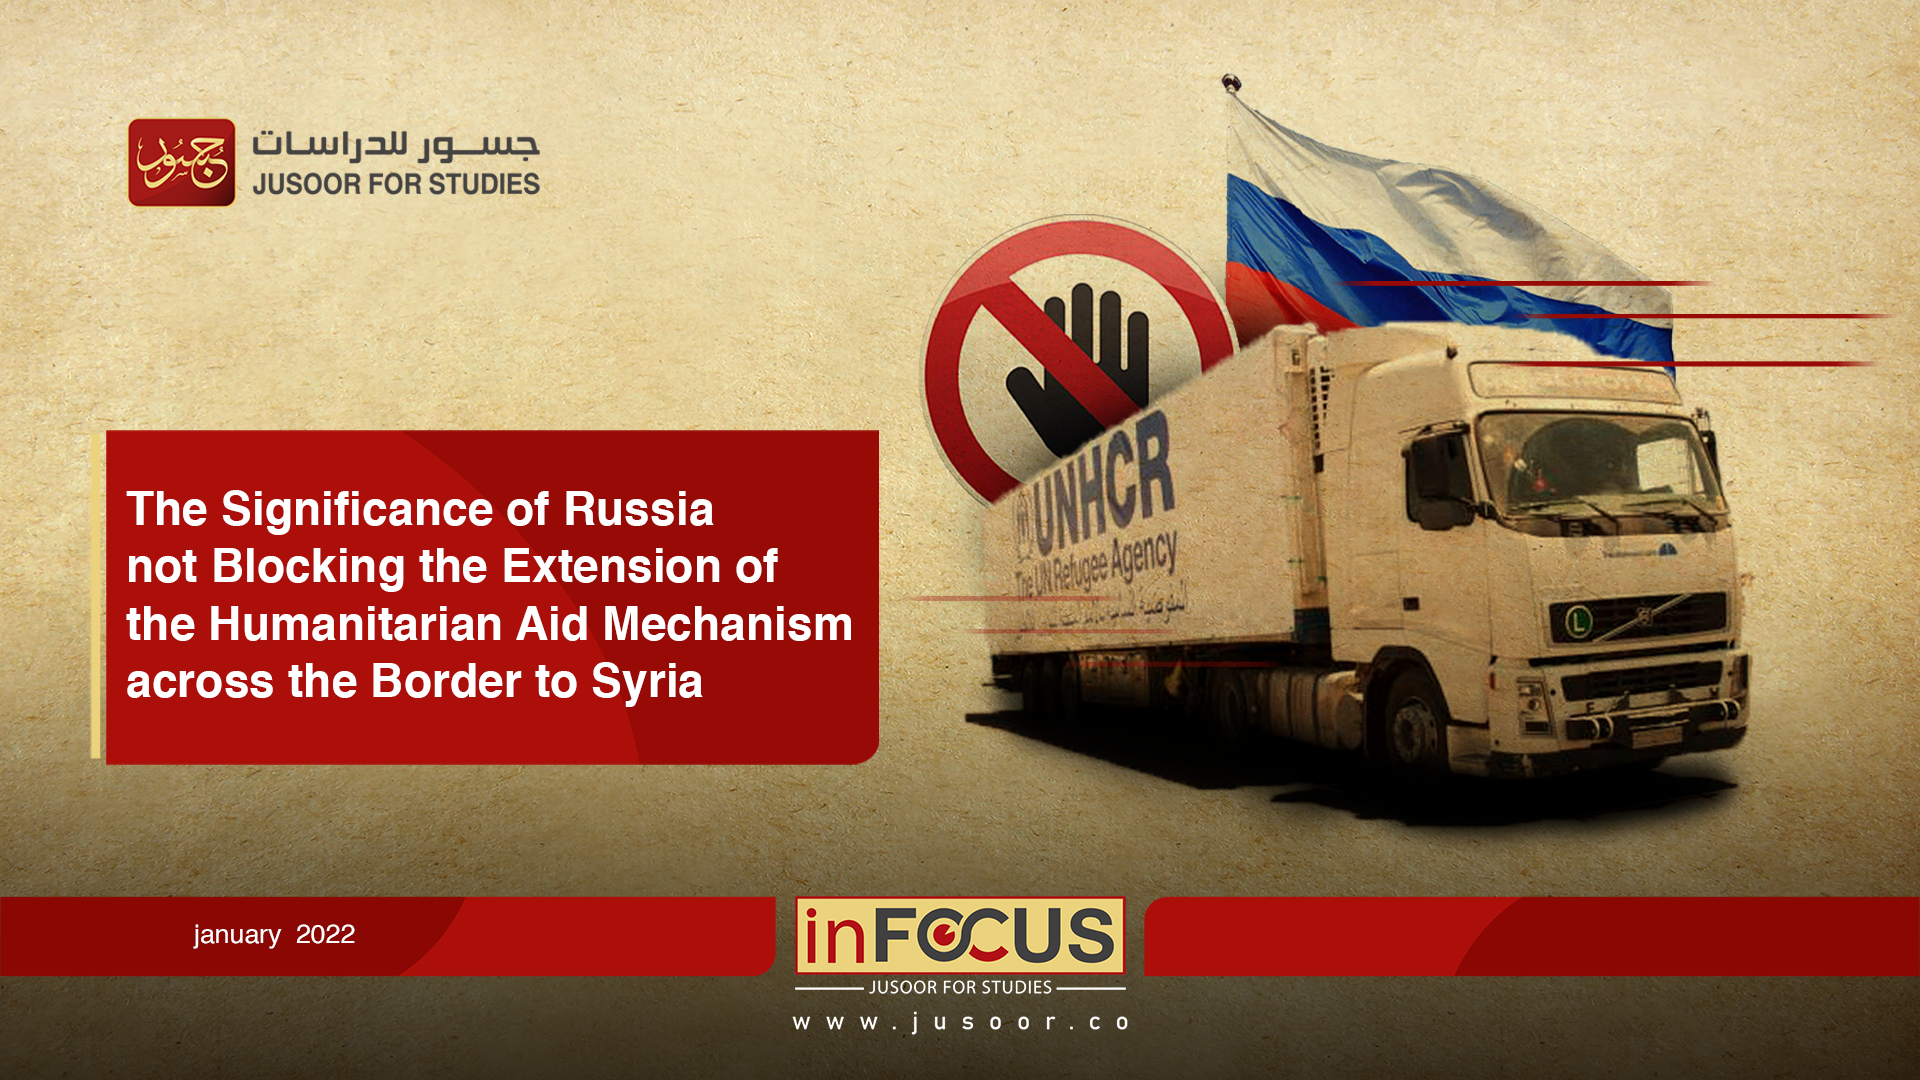 The Significance of Russia not Blocking the Extension of the Humanitarian Aid Mechanism across the Border to Syria